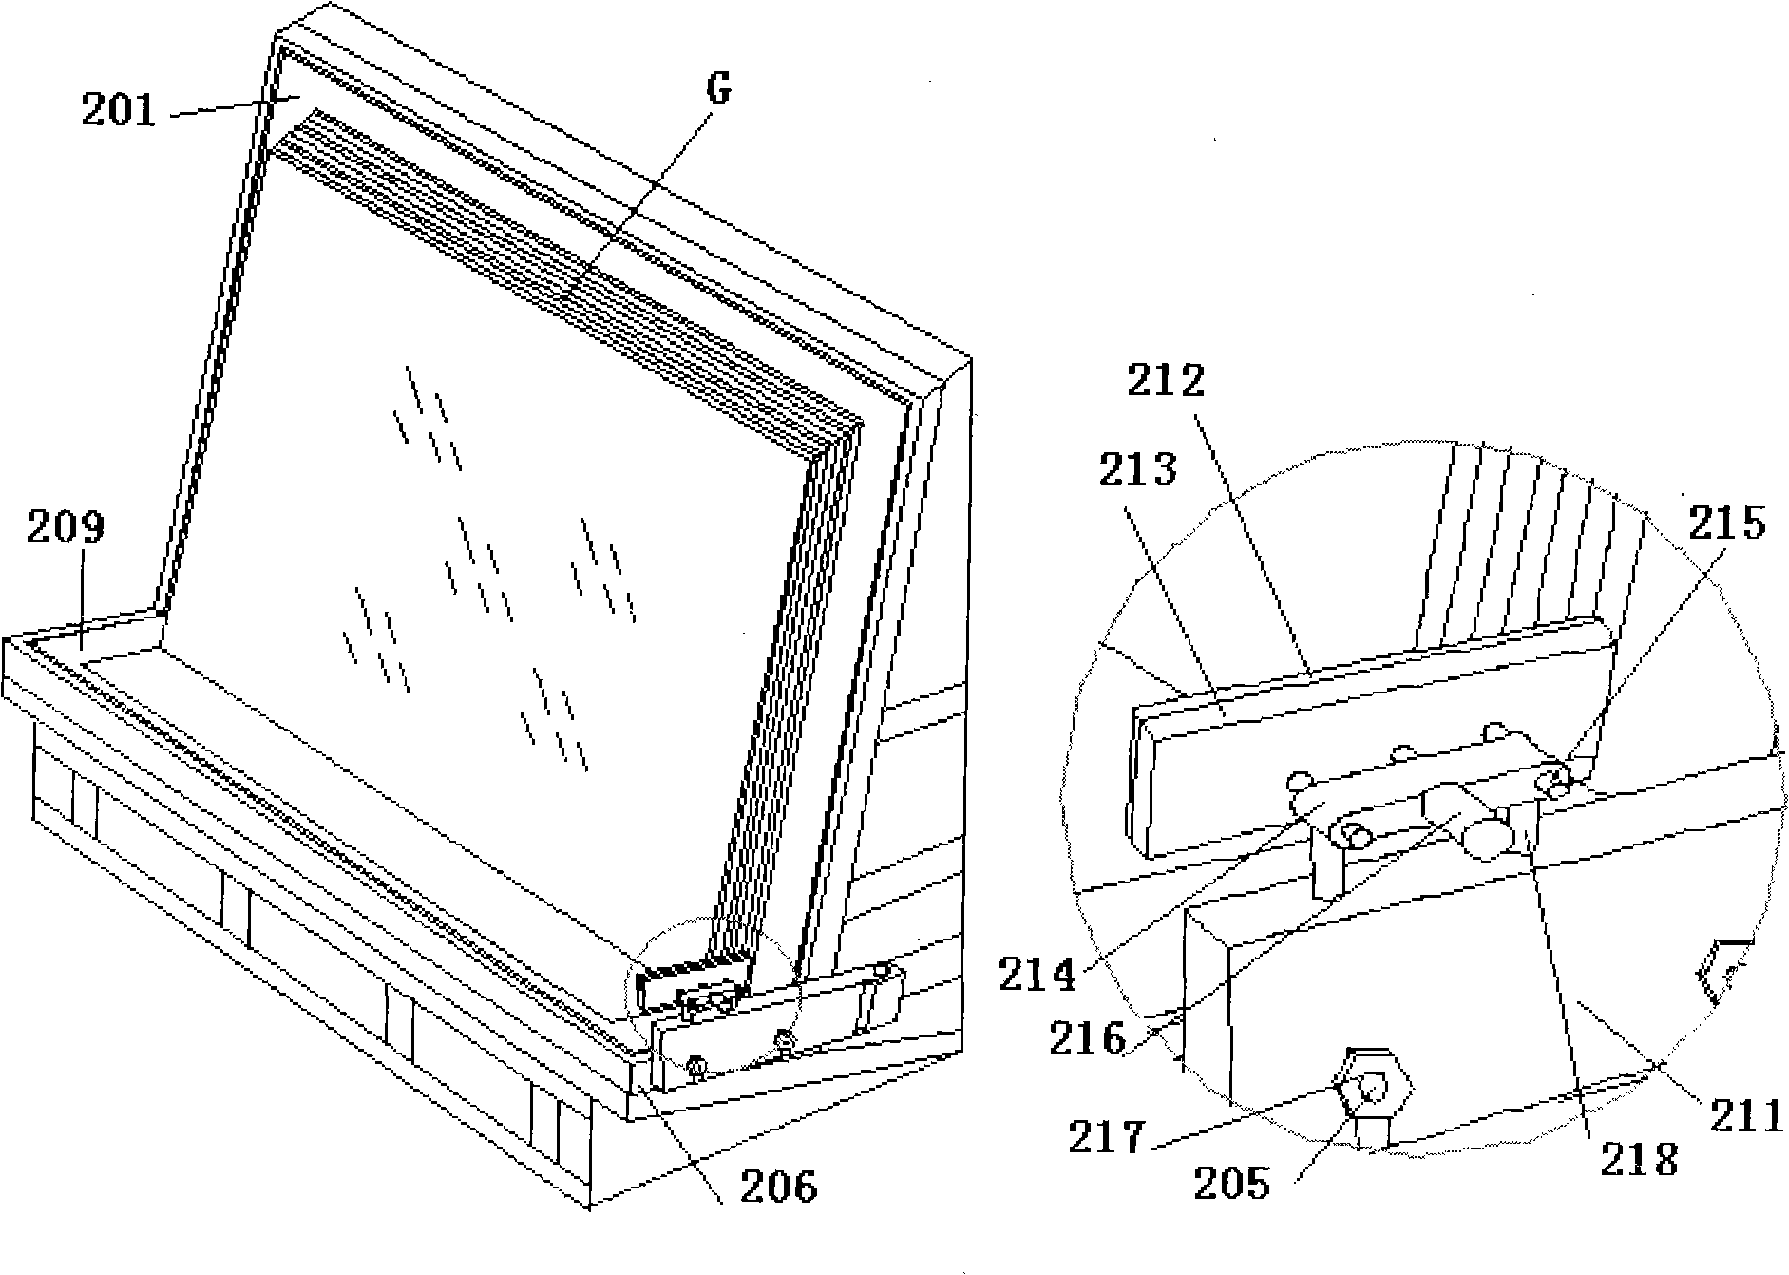 Packaging device and box of flat glass plate for displaying